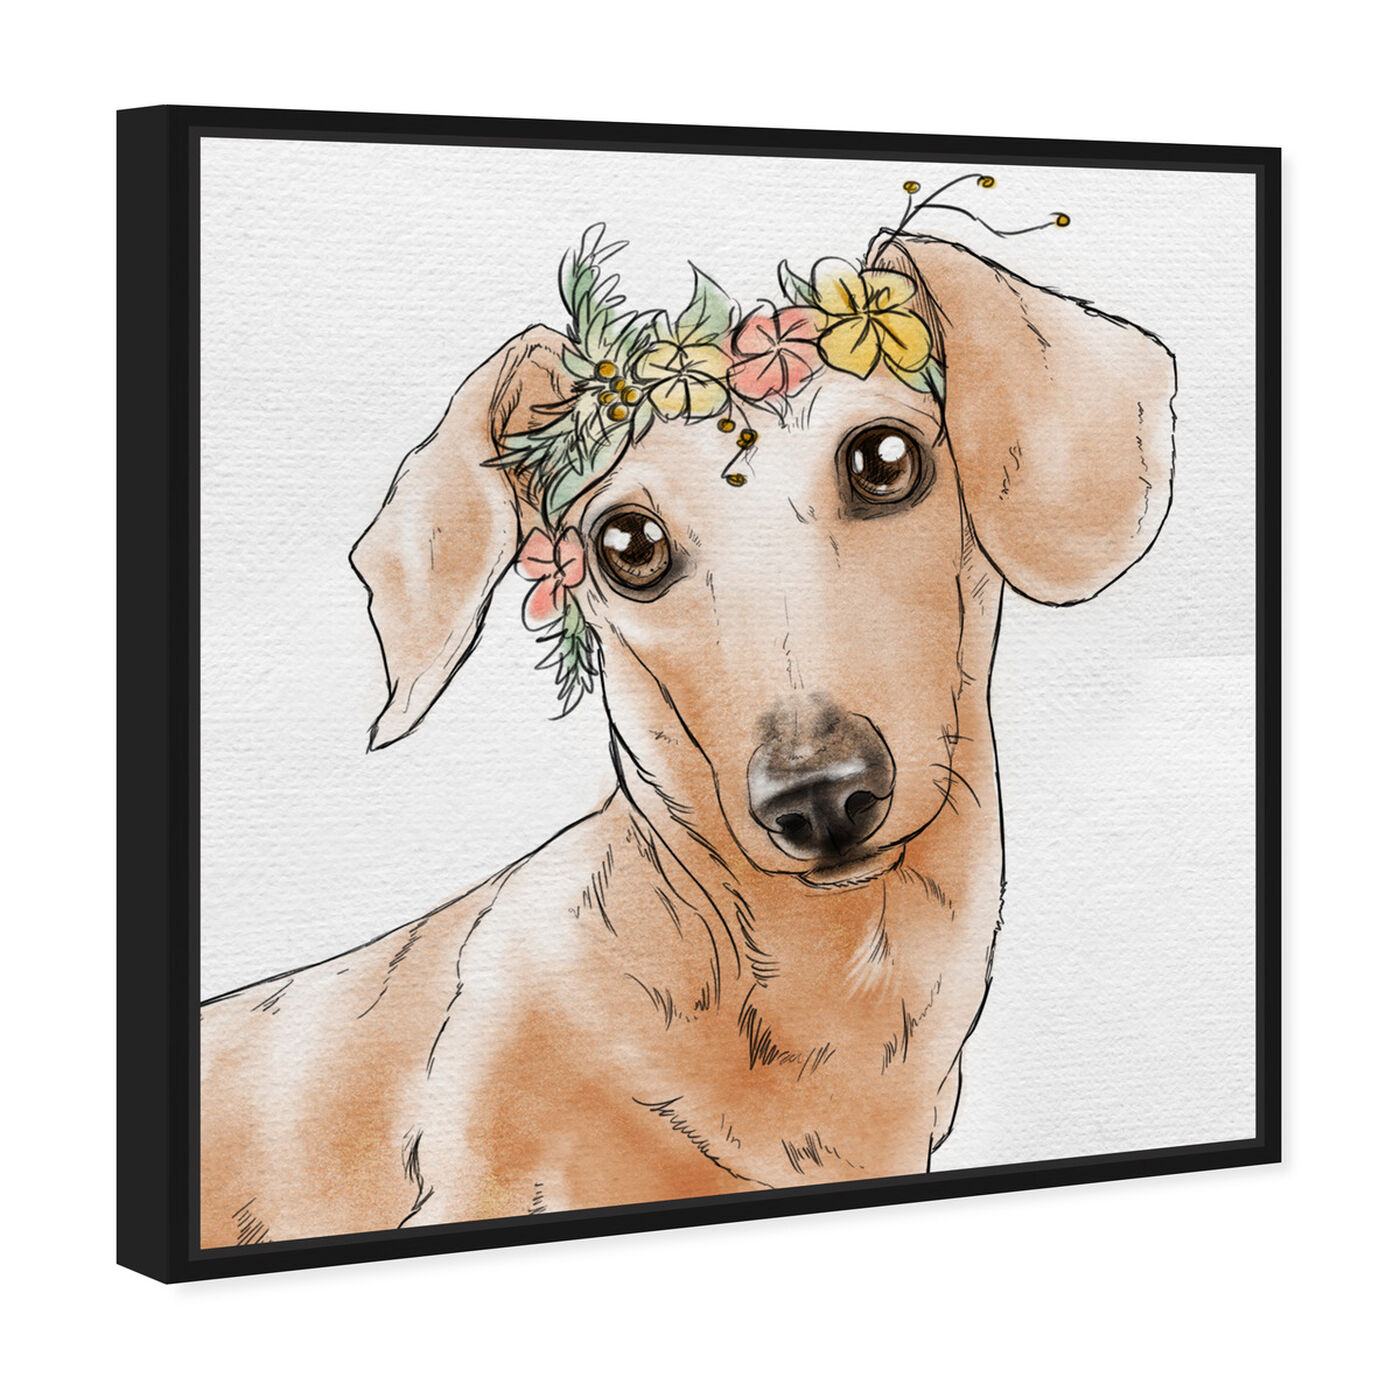 Angled view of Floral Crown Dachshund featuring animals and dogs and puppies art.